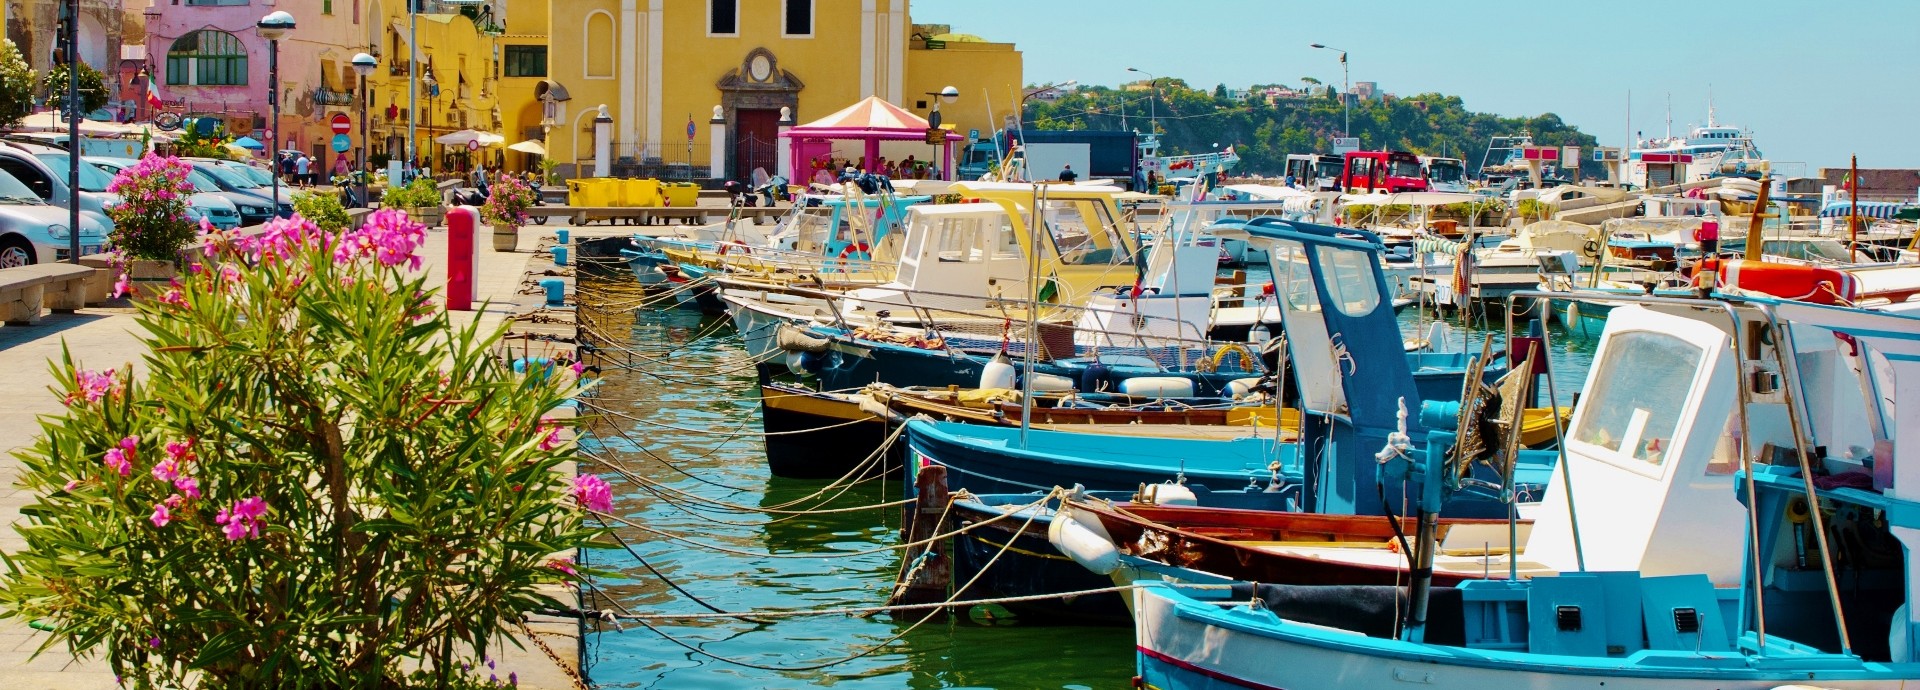 Fishing boats on Procida Island in the Bay of Naples